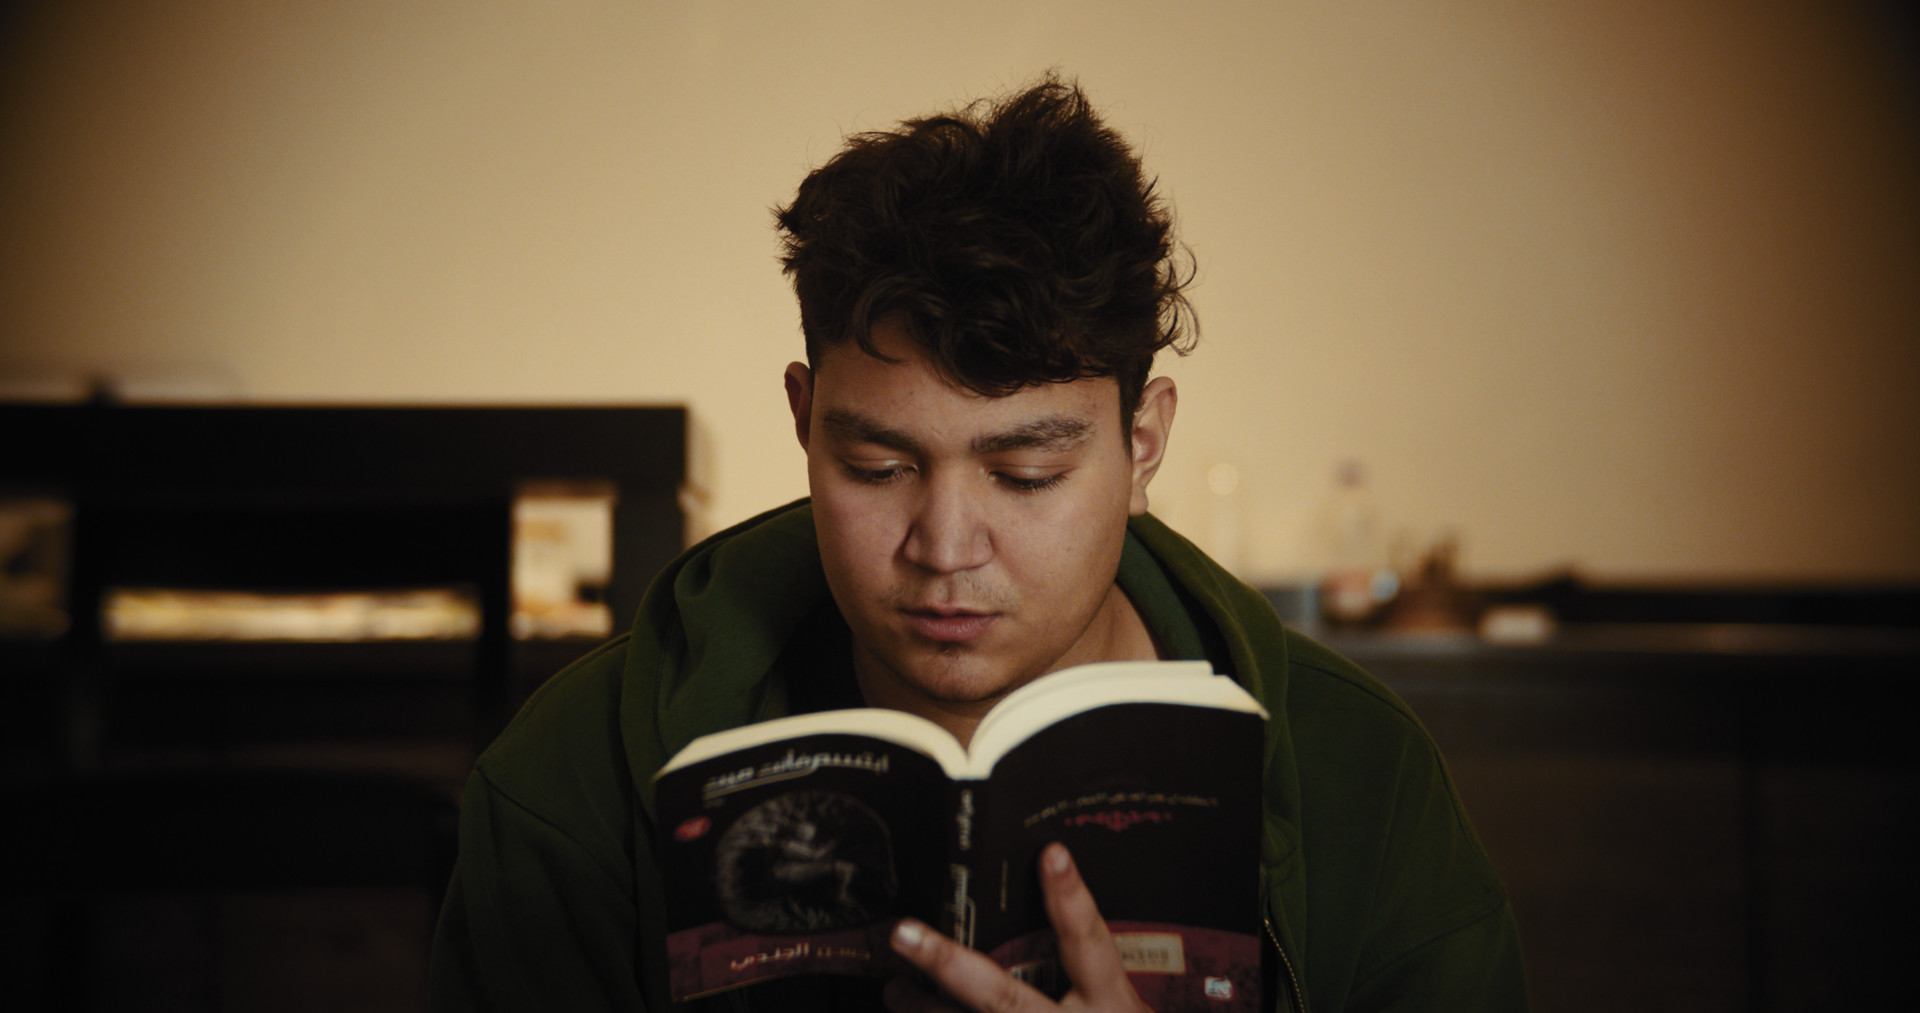 A screenshot of the film "Okay." A young man sits in the center of the screen while reading a book. The lighting and tone are dark and ominous.